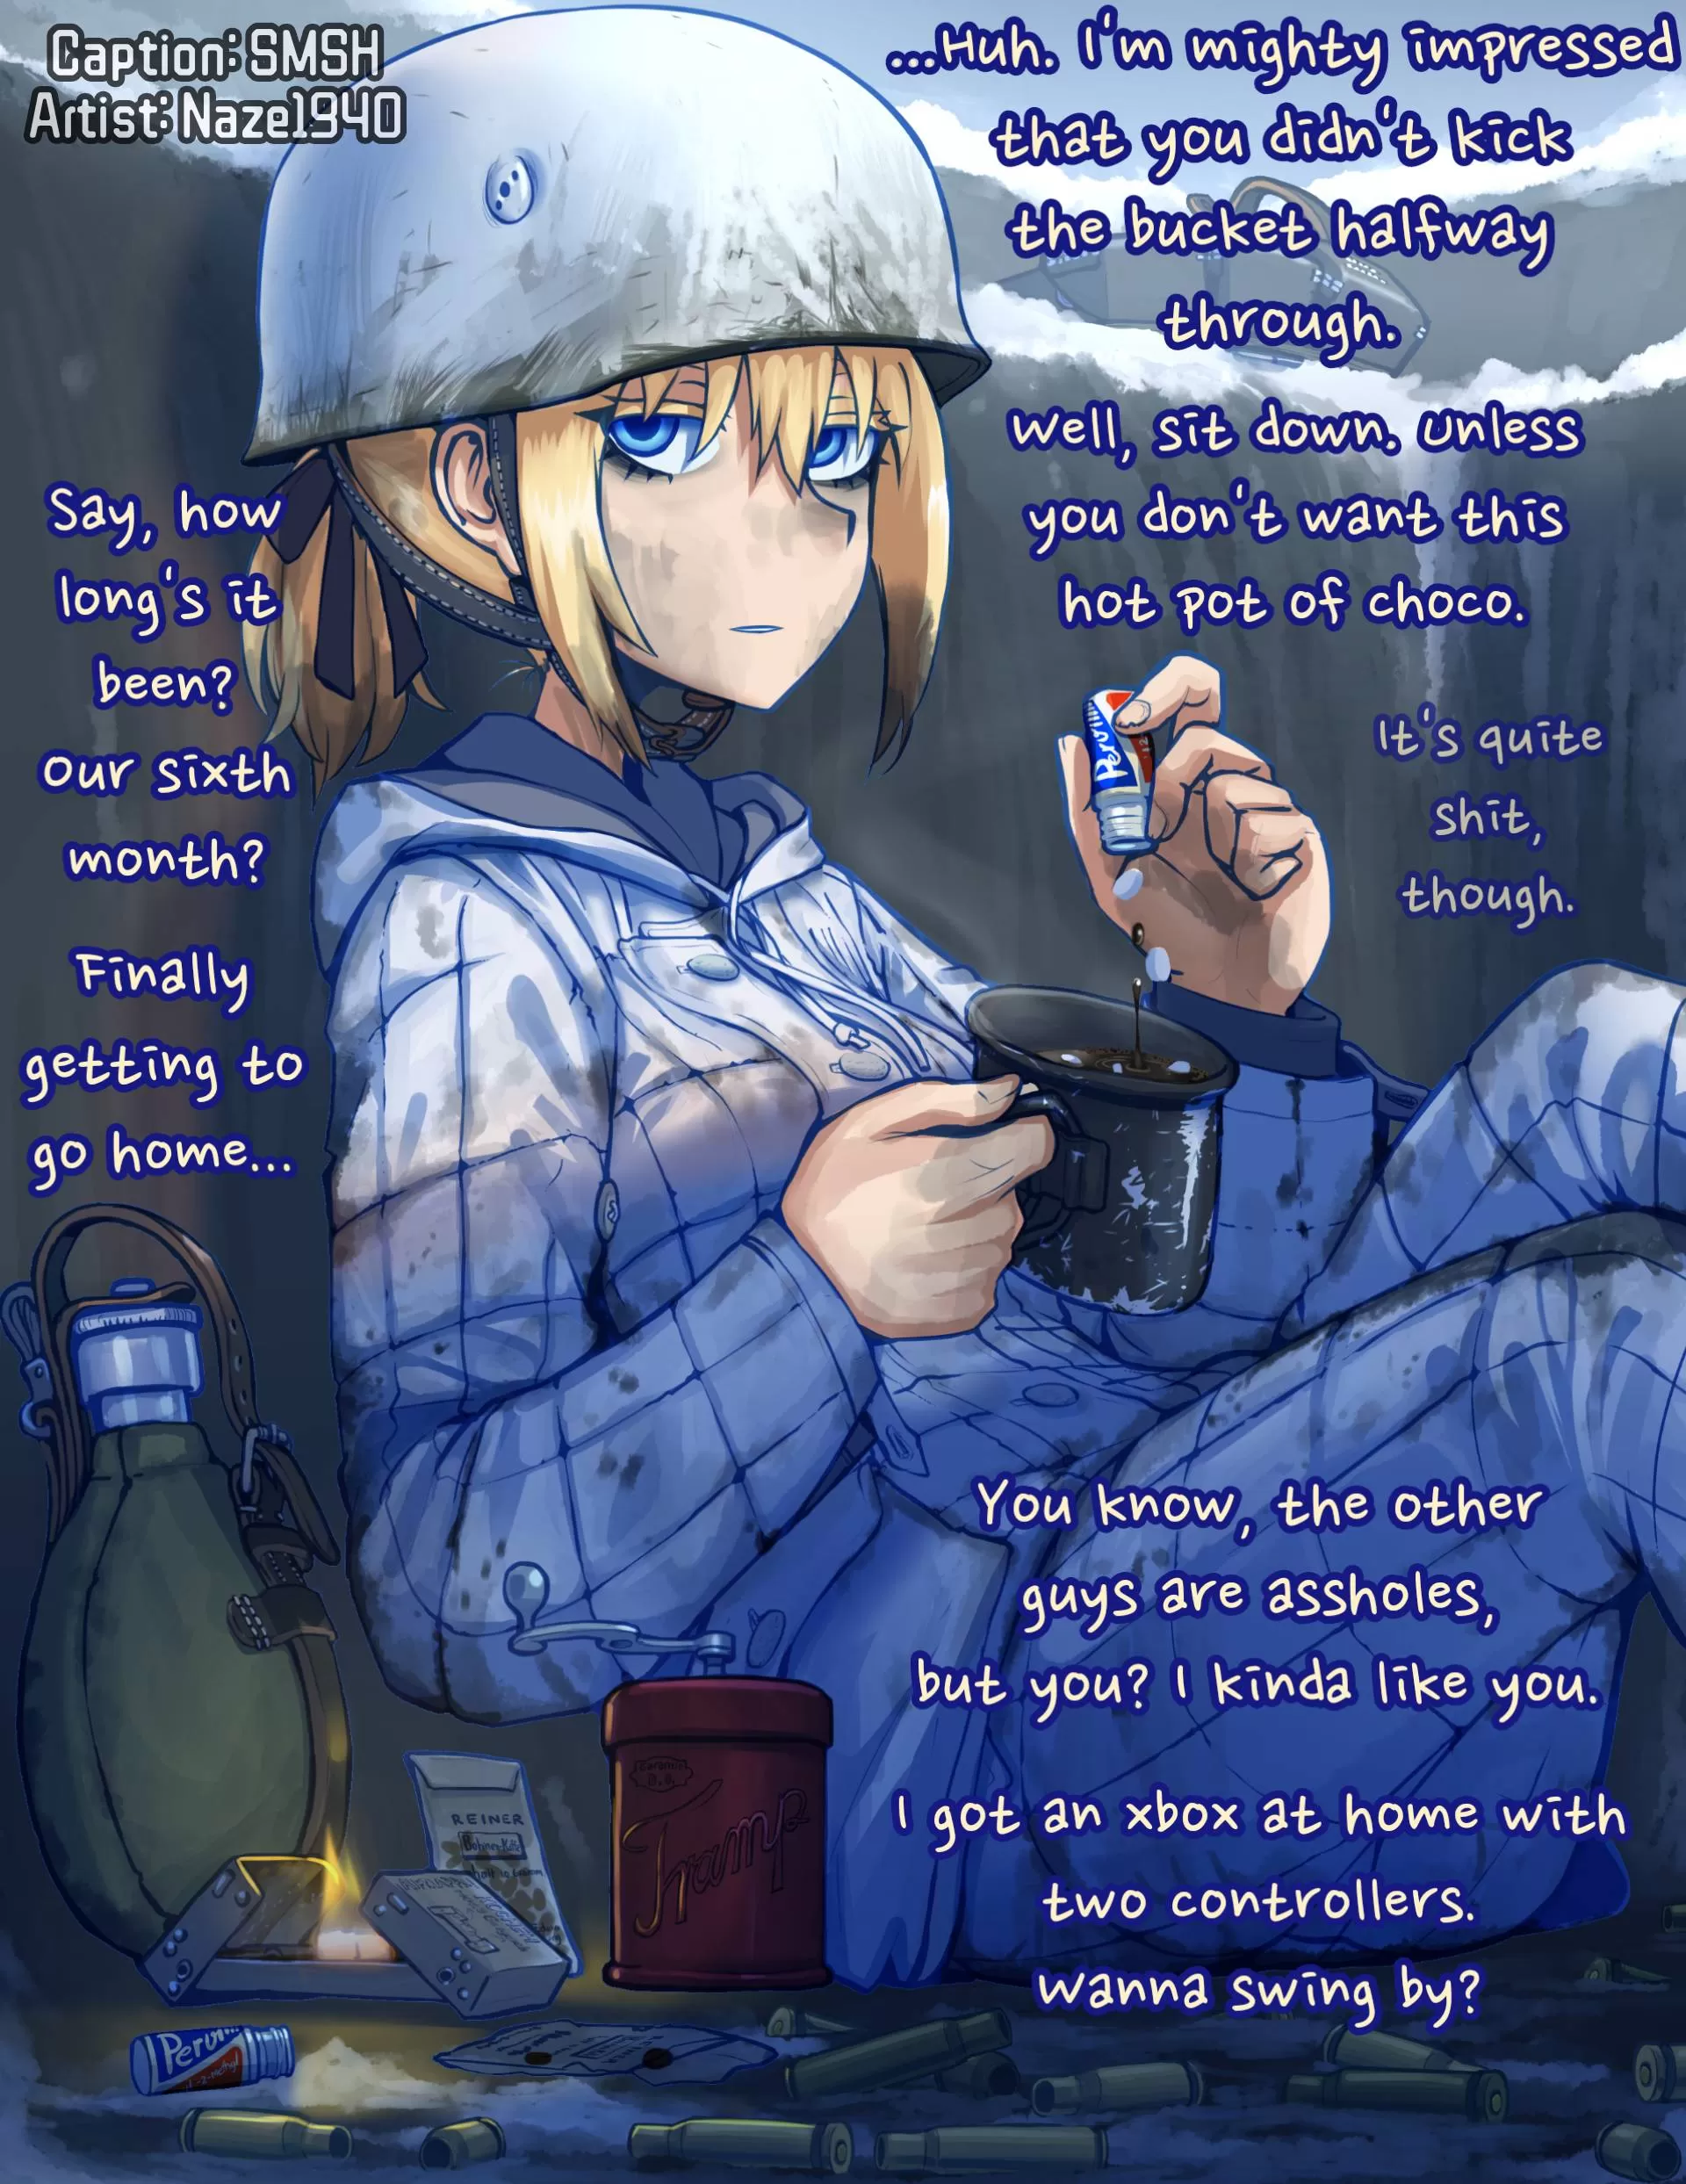 1920px x 2487px - Sup. Didn't die? [Military] [Getting To Go Home] [Banter] [Confession (?)]  [Hot Chocolate] [Shitpost] nudes by SMSH-1A